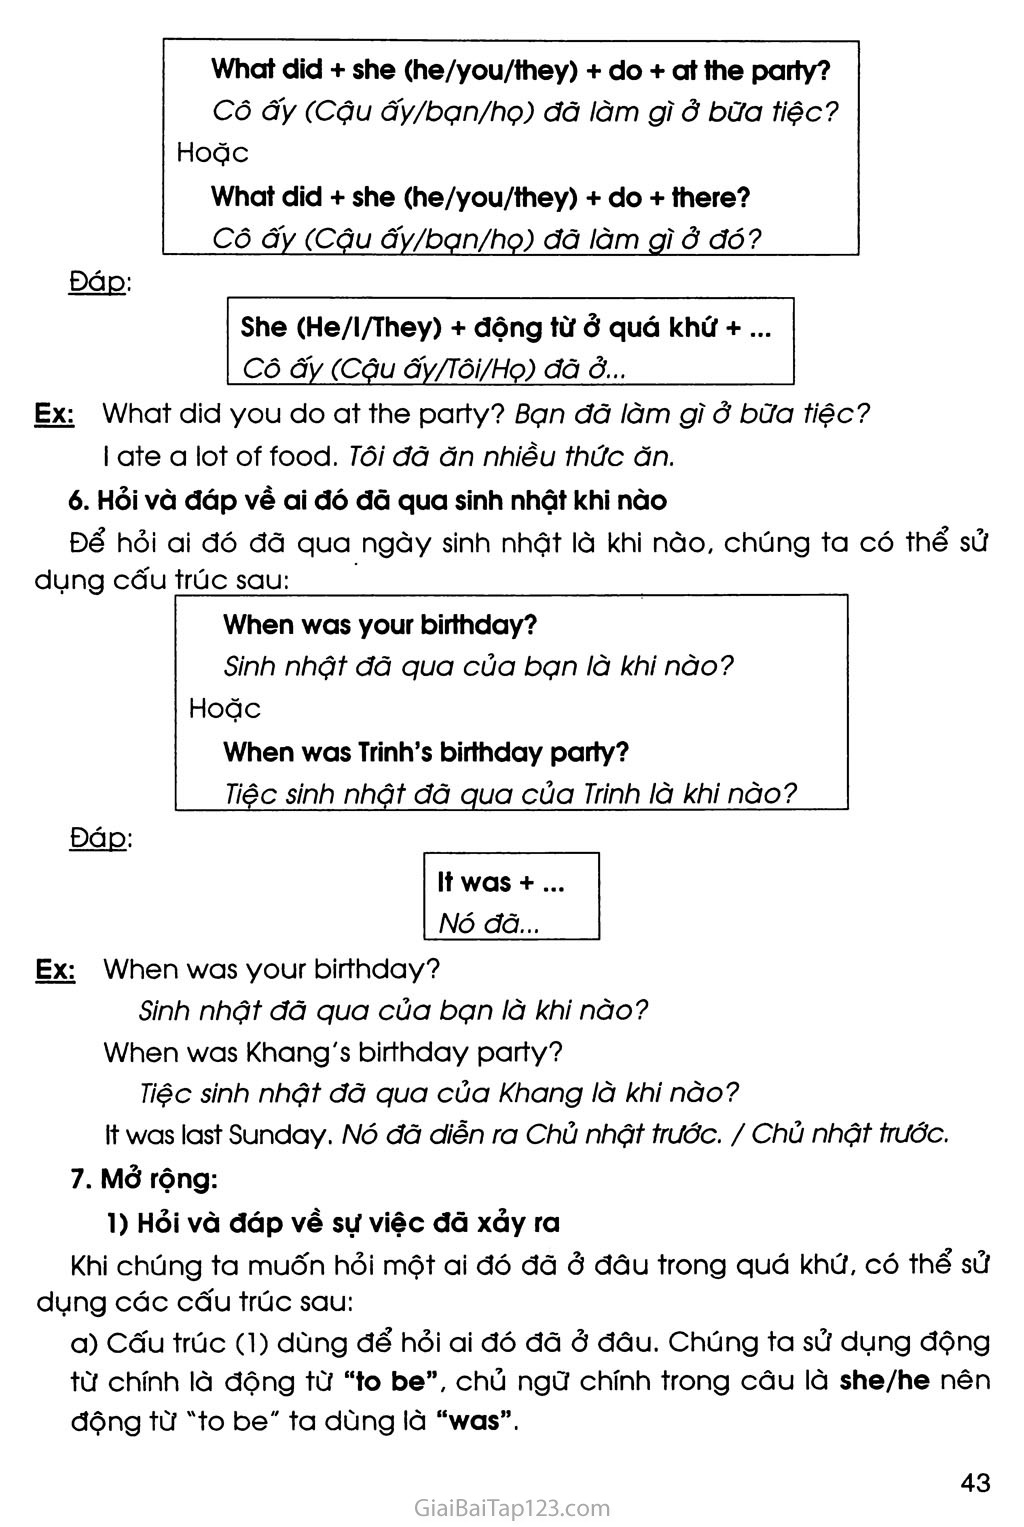 UNIT 4: DID YOU GO TO THE PARTY? trang 4